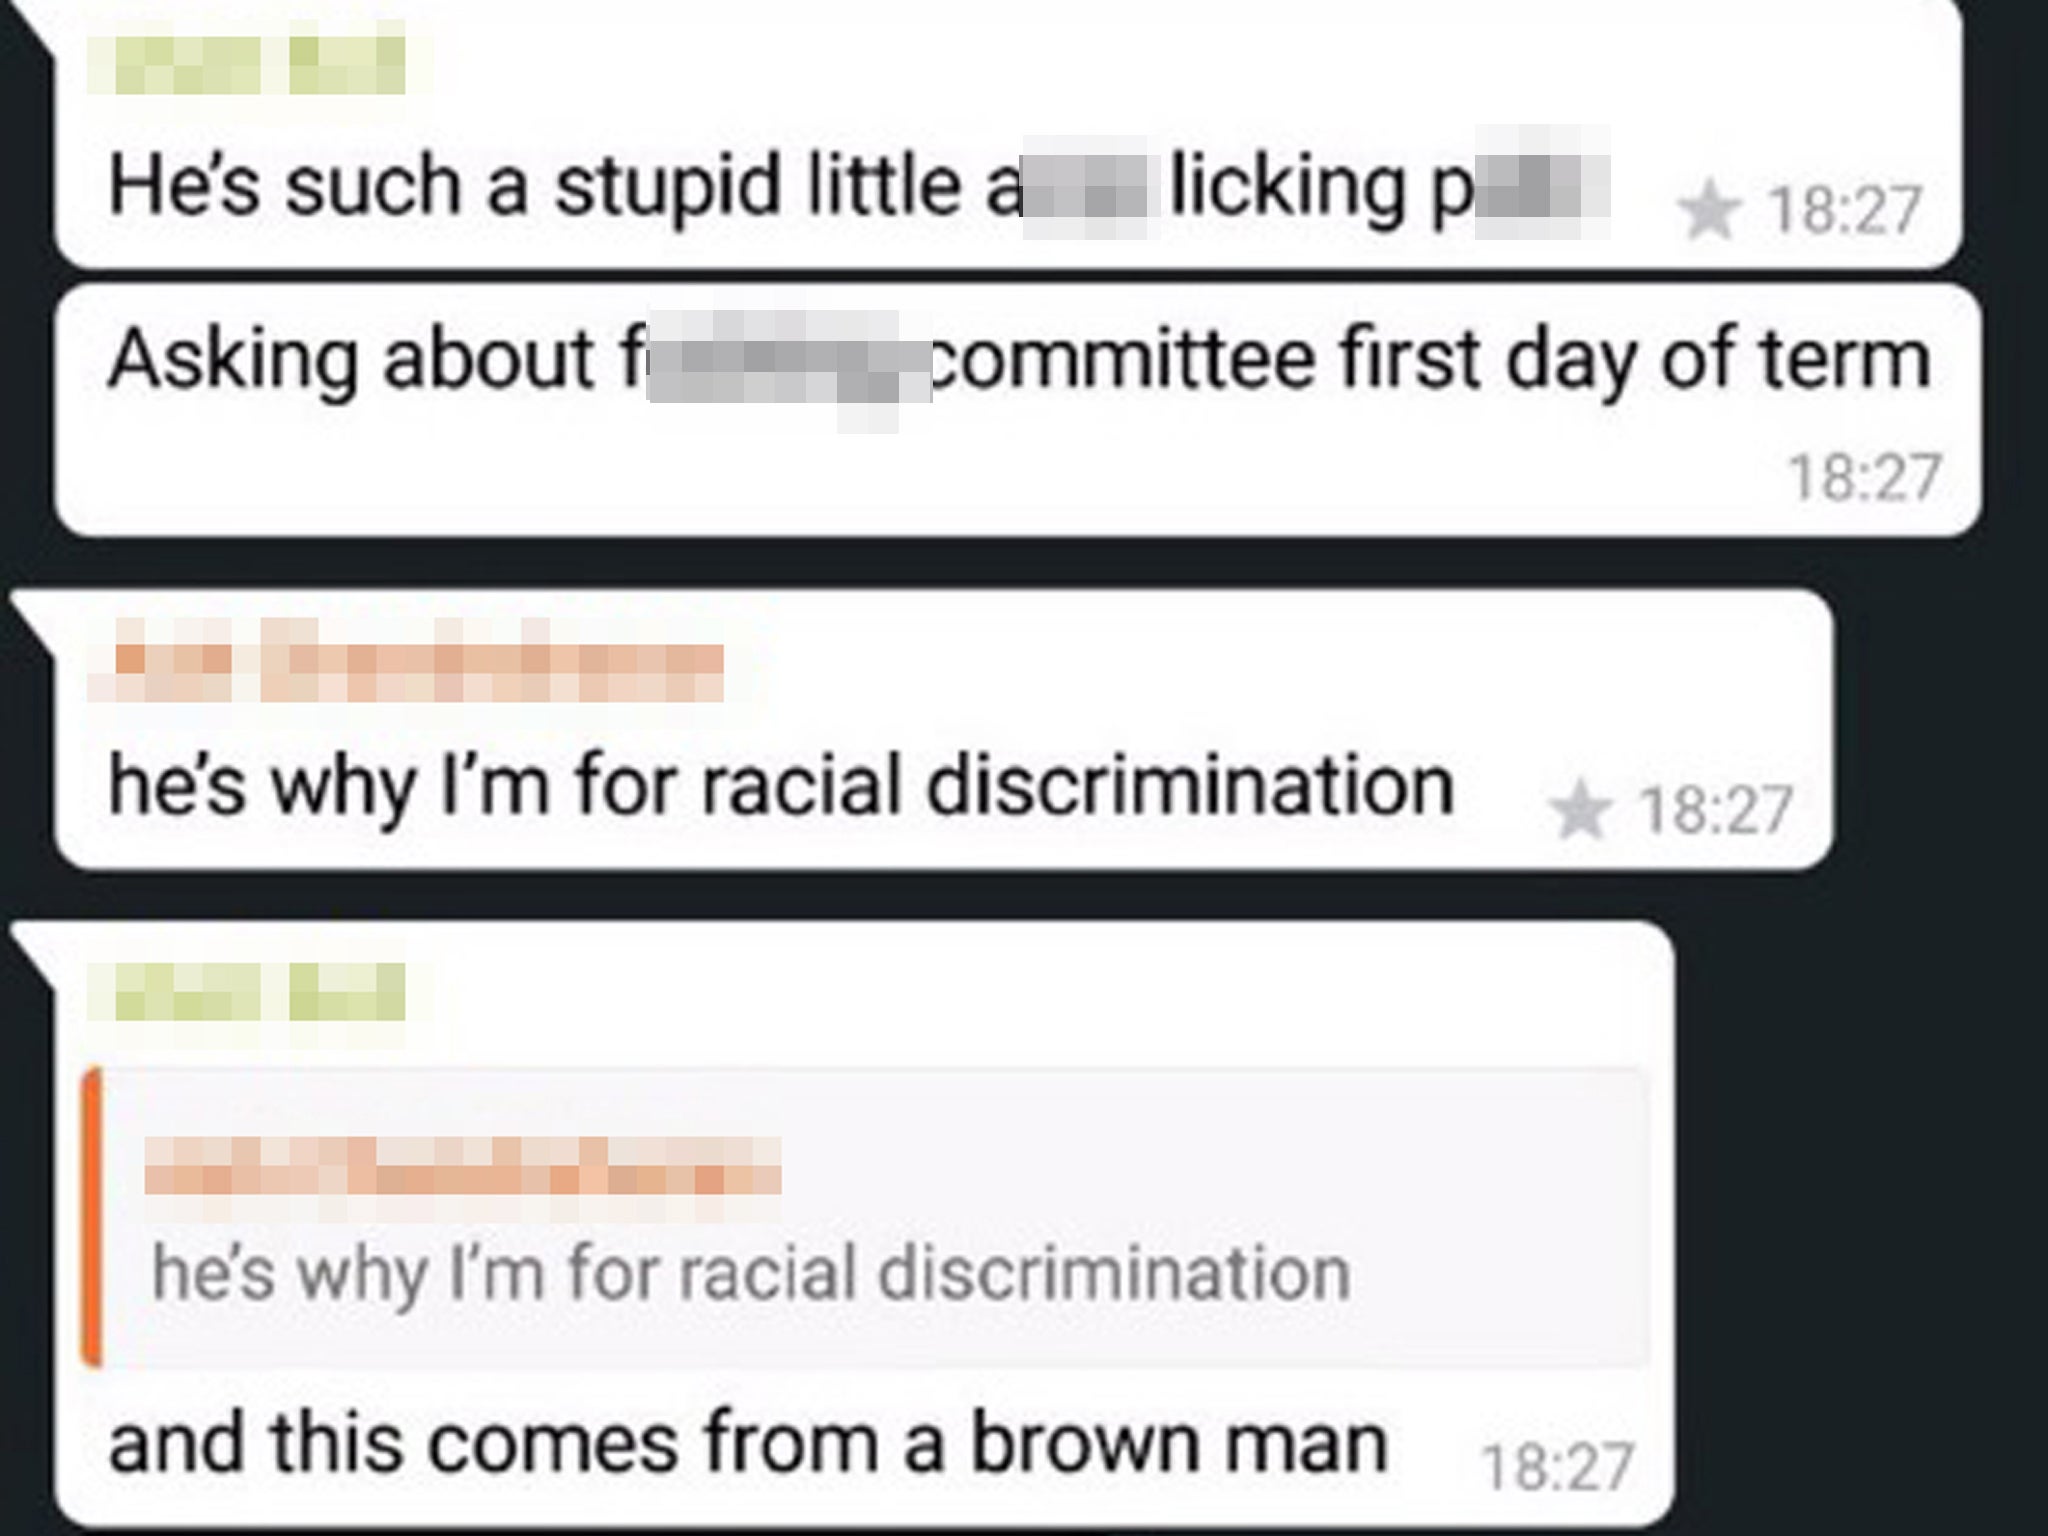 Racial slurs, derogatory terms and rape ‘jokes’ all feature in the private messages